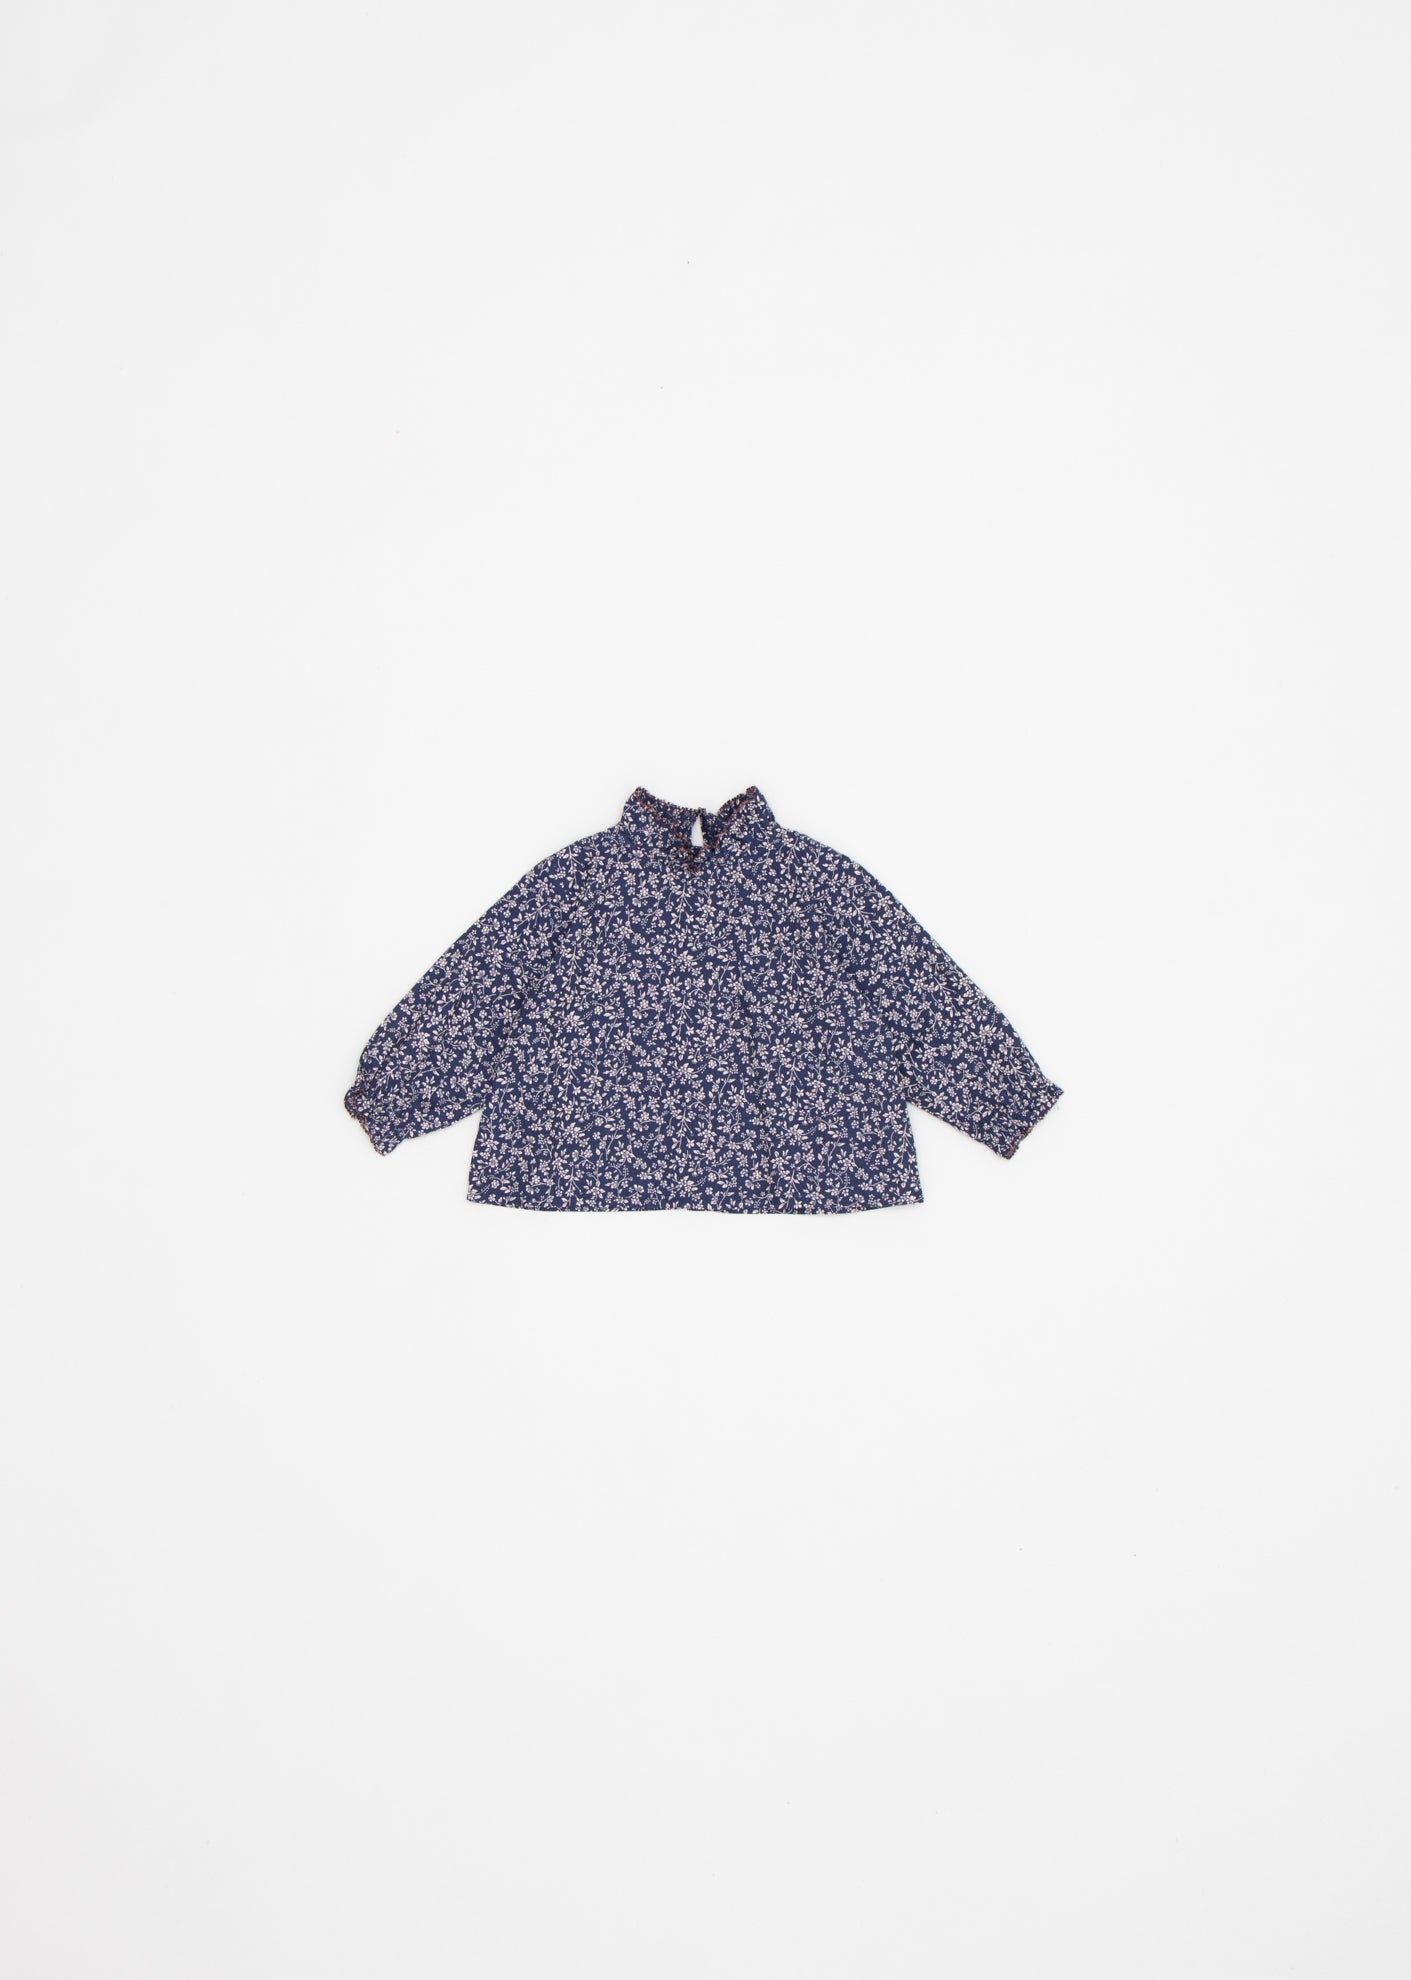 AMICIA BABY BLOUSE - NAVY FLORAL 1